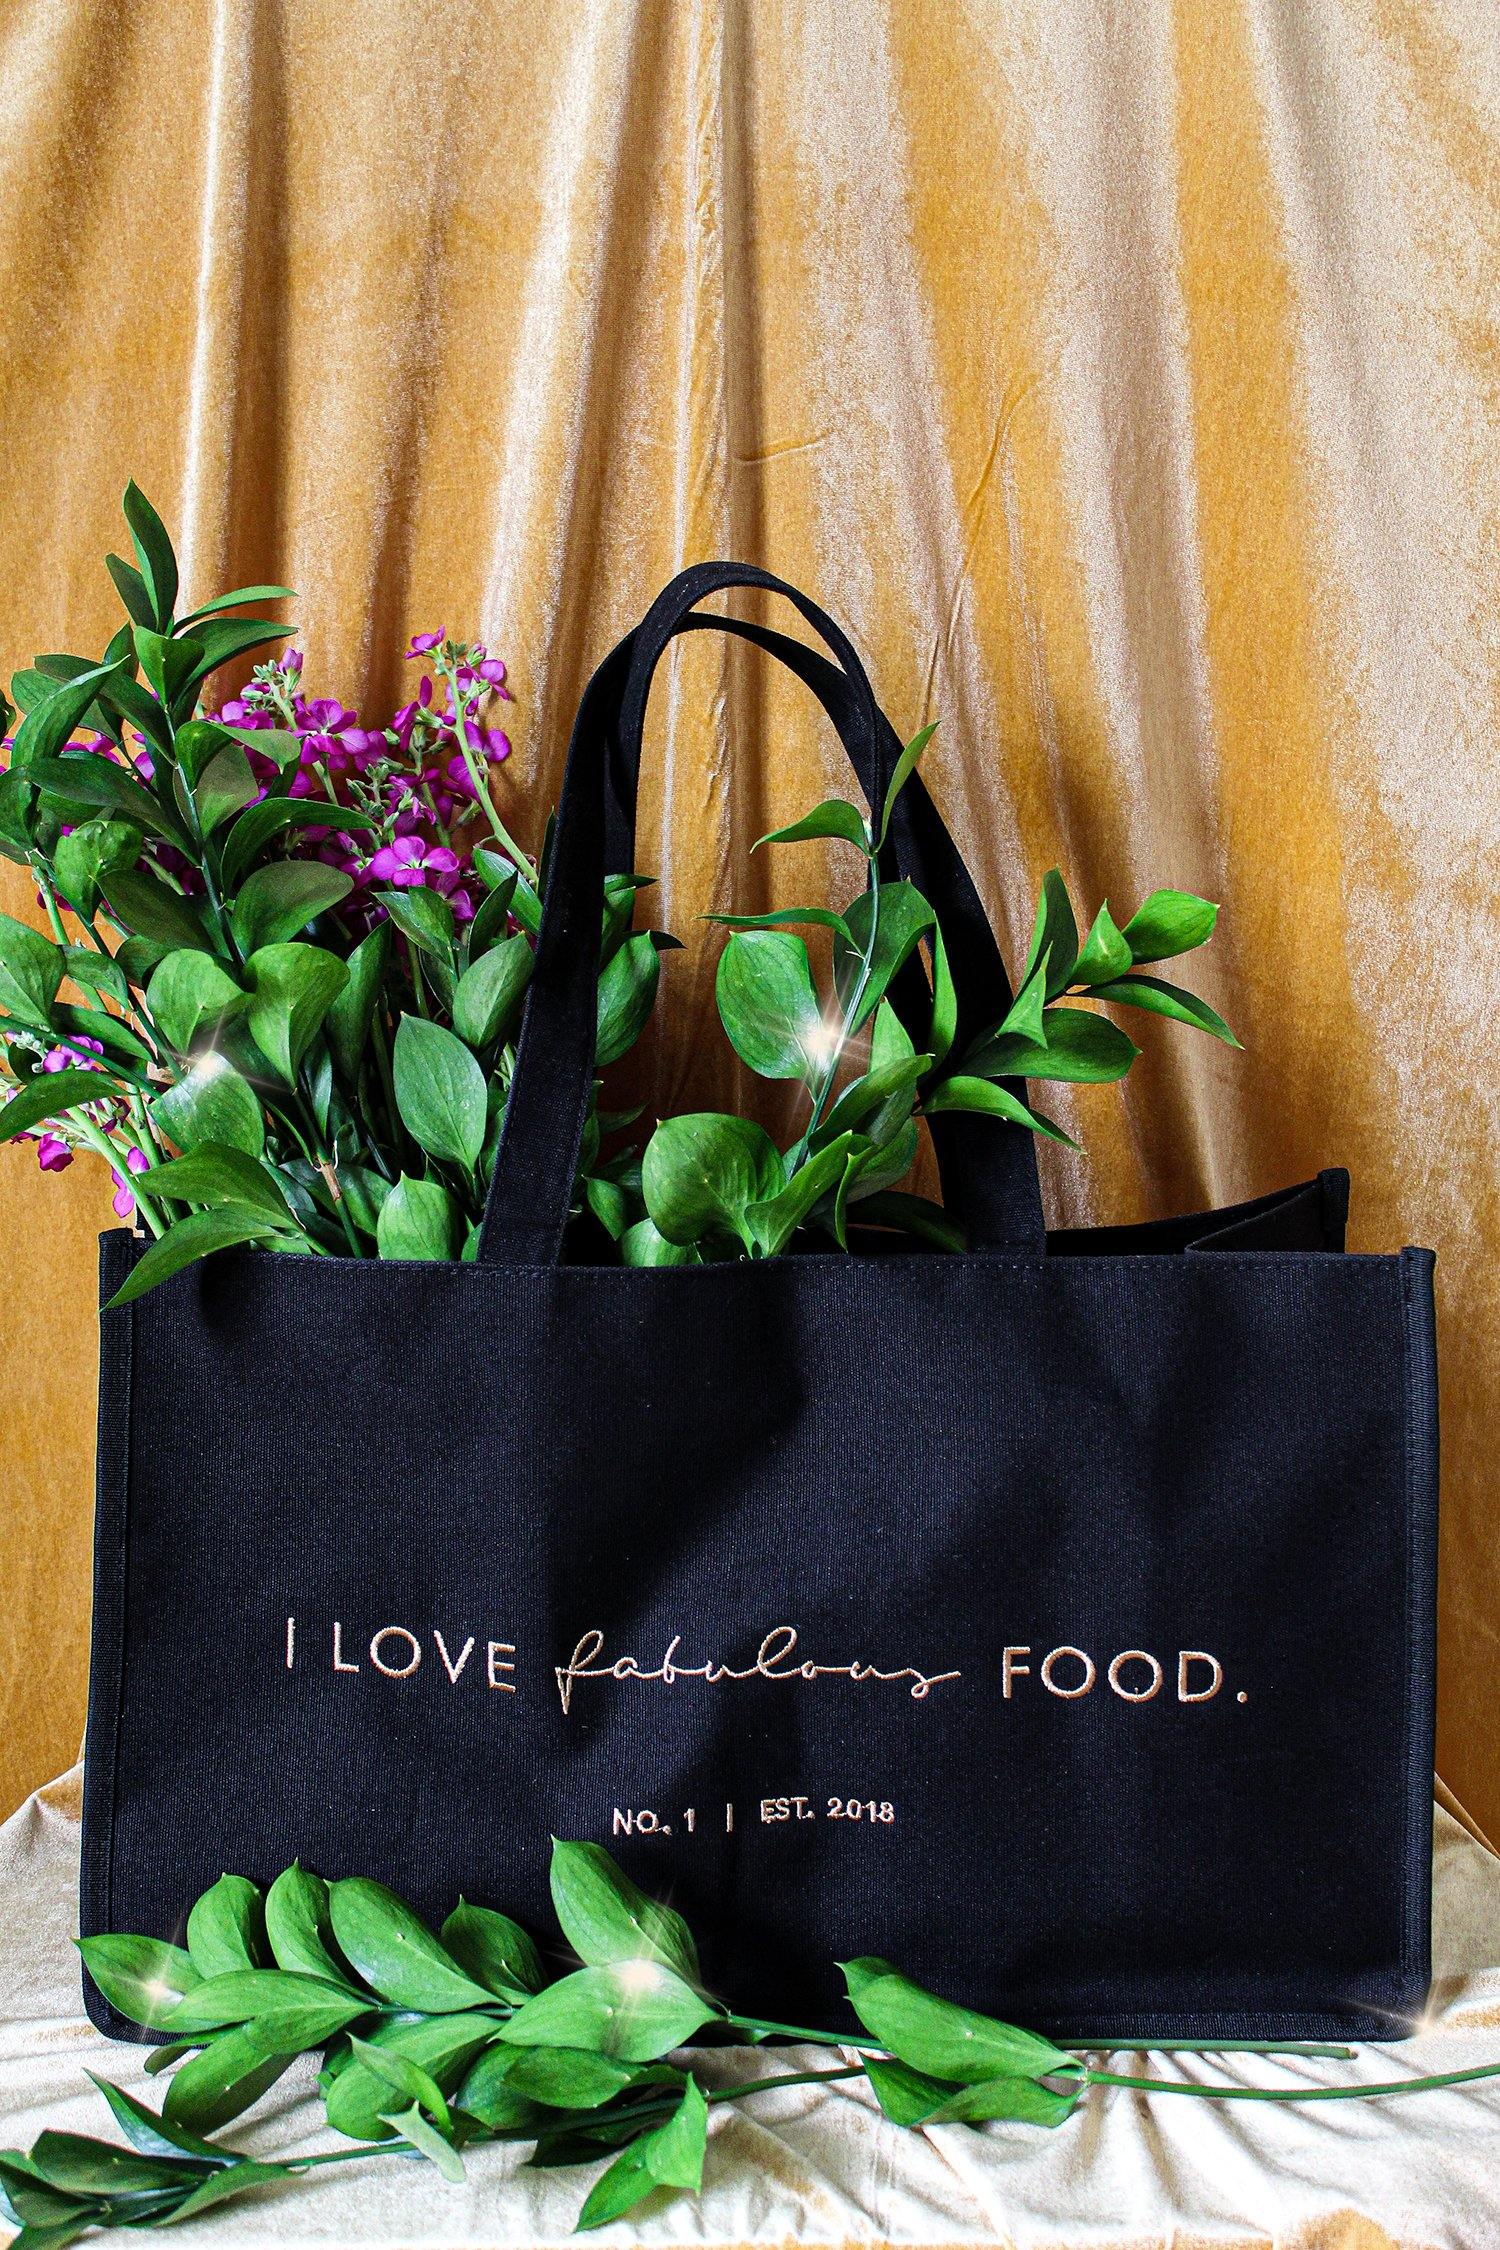 LUXE OVERSIZED MARKET TOTE - My Fabulous Food